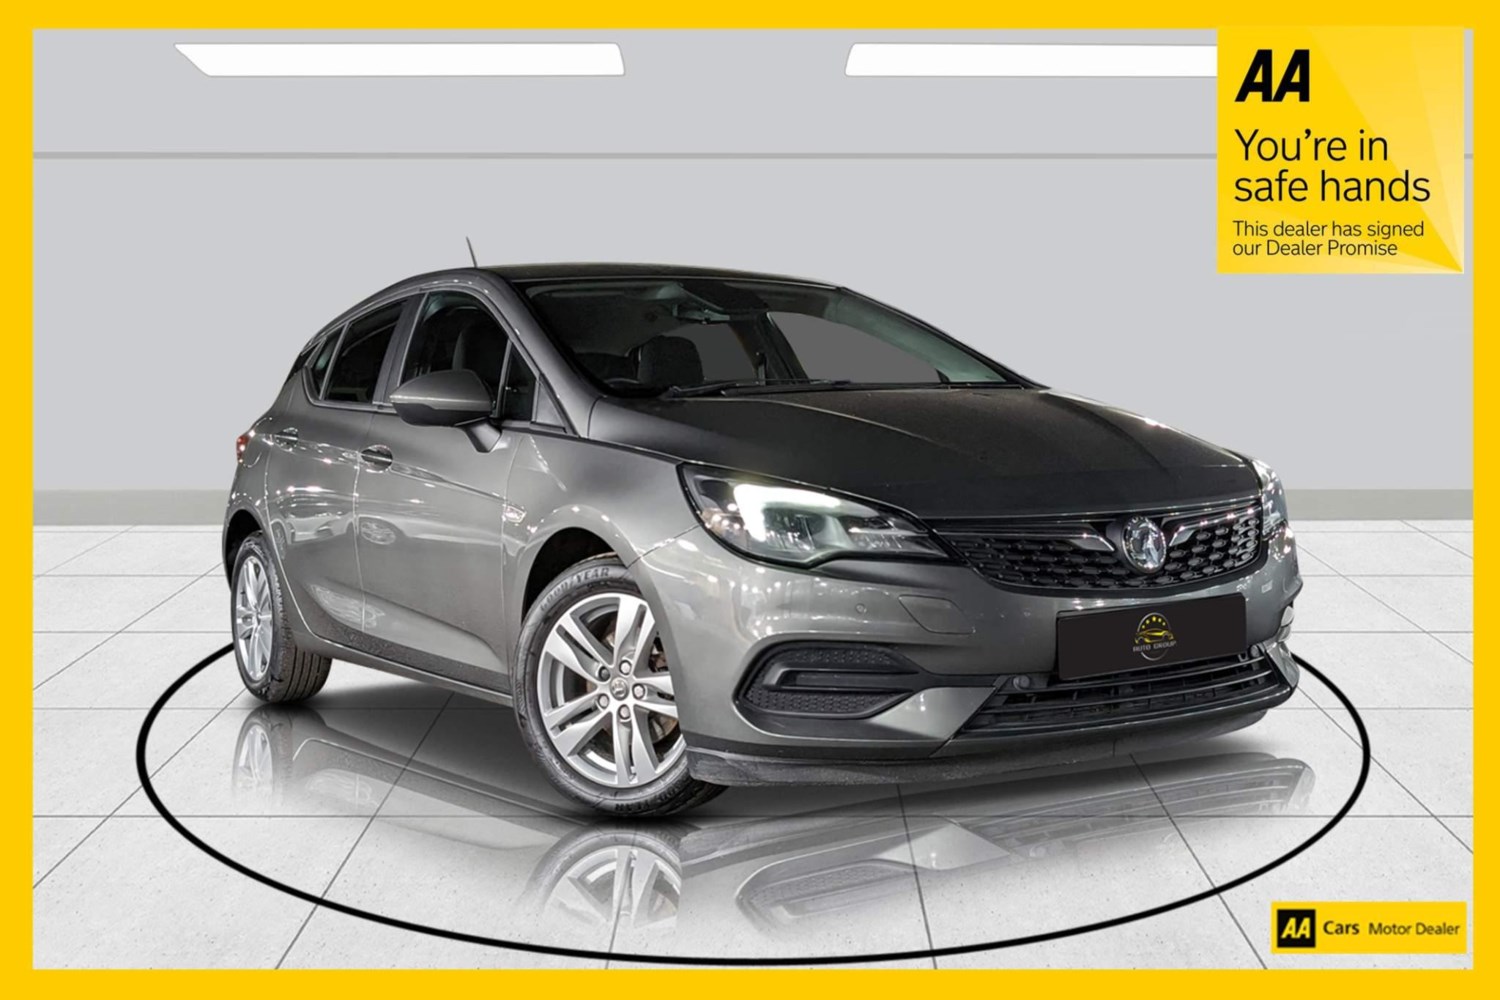 2020 used Vauxhall Astra 1.5 Turbo D Business Edition Nav Euro 6 (s/s) 5dr